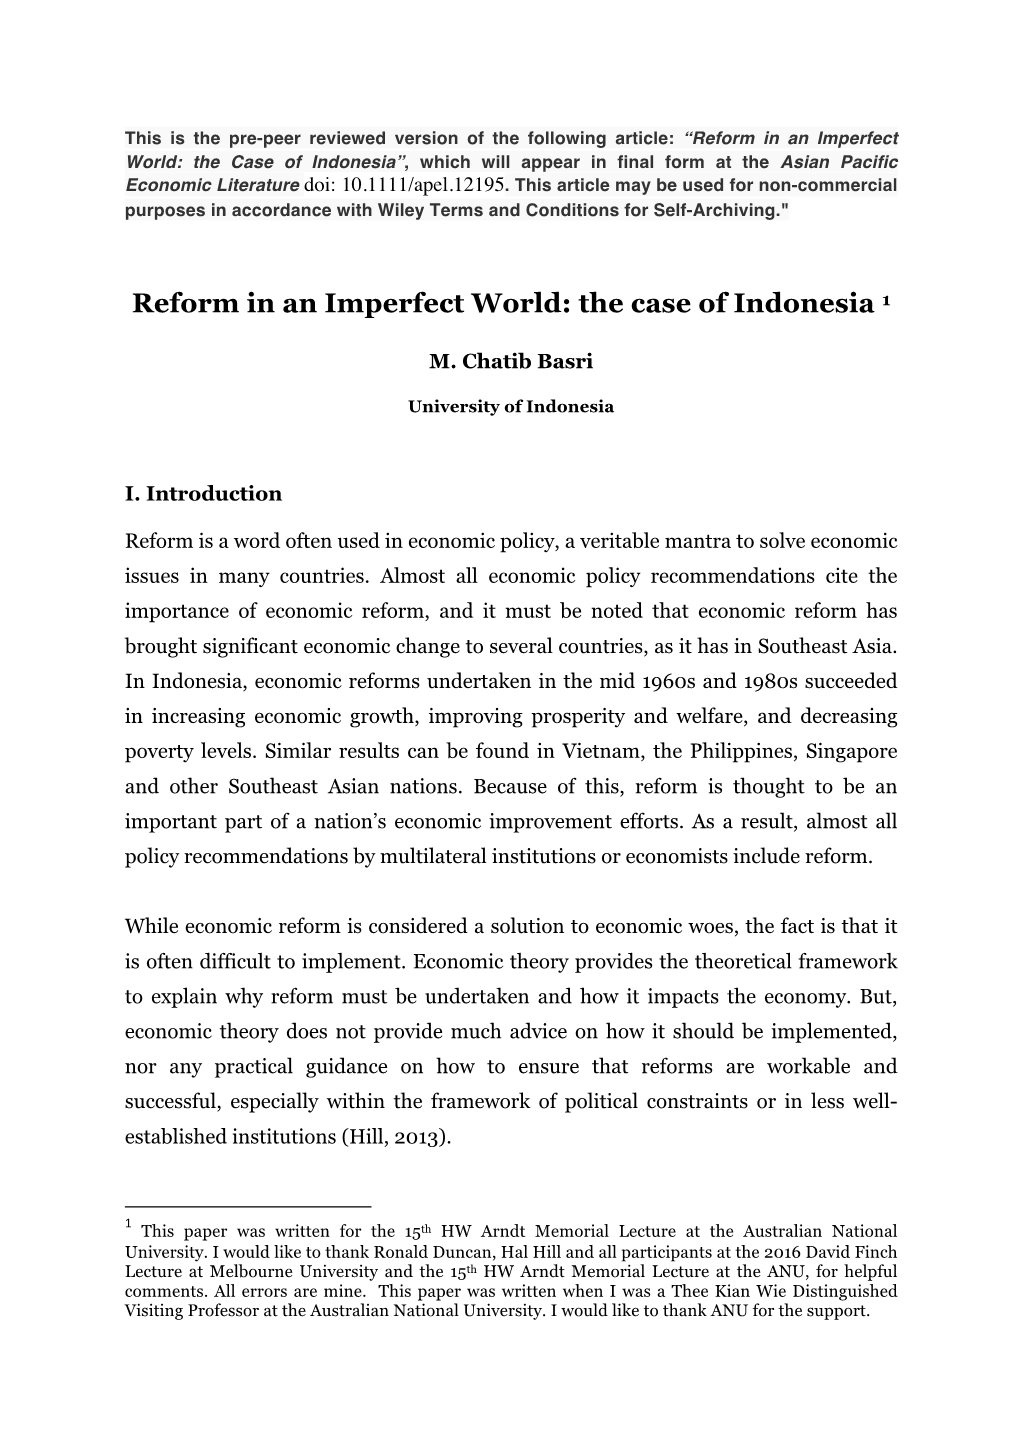 Reform in an Imperfect World: the Case of Indonesia 1